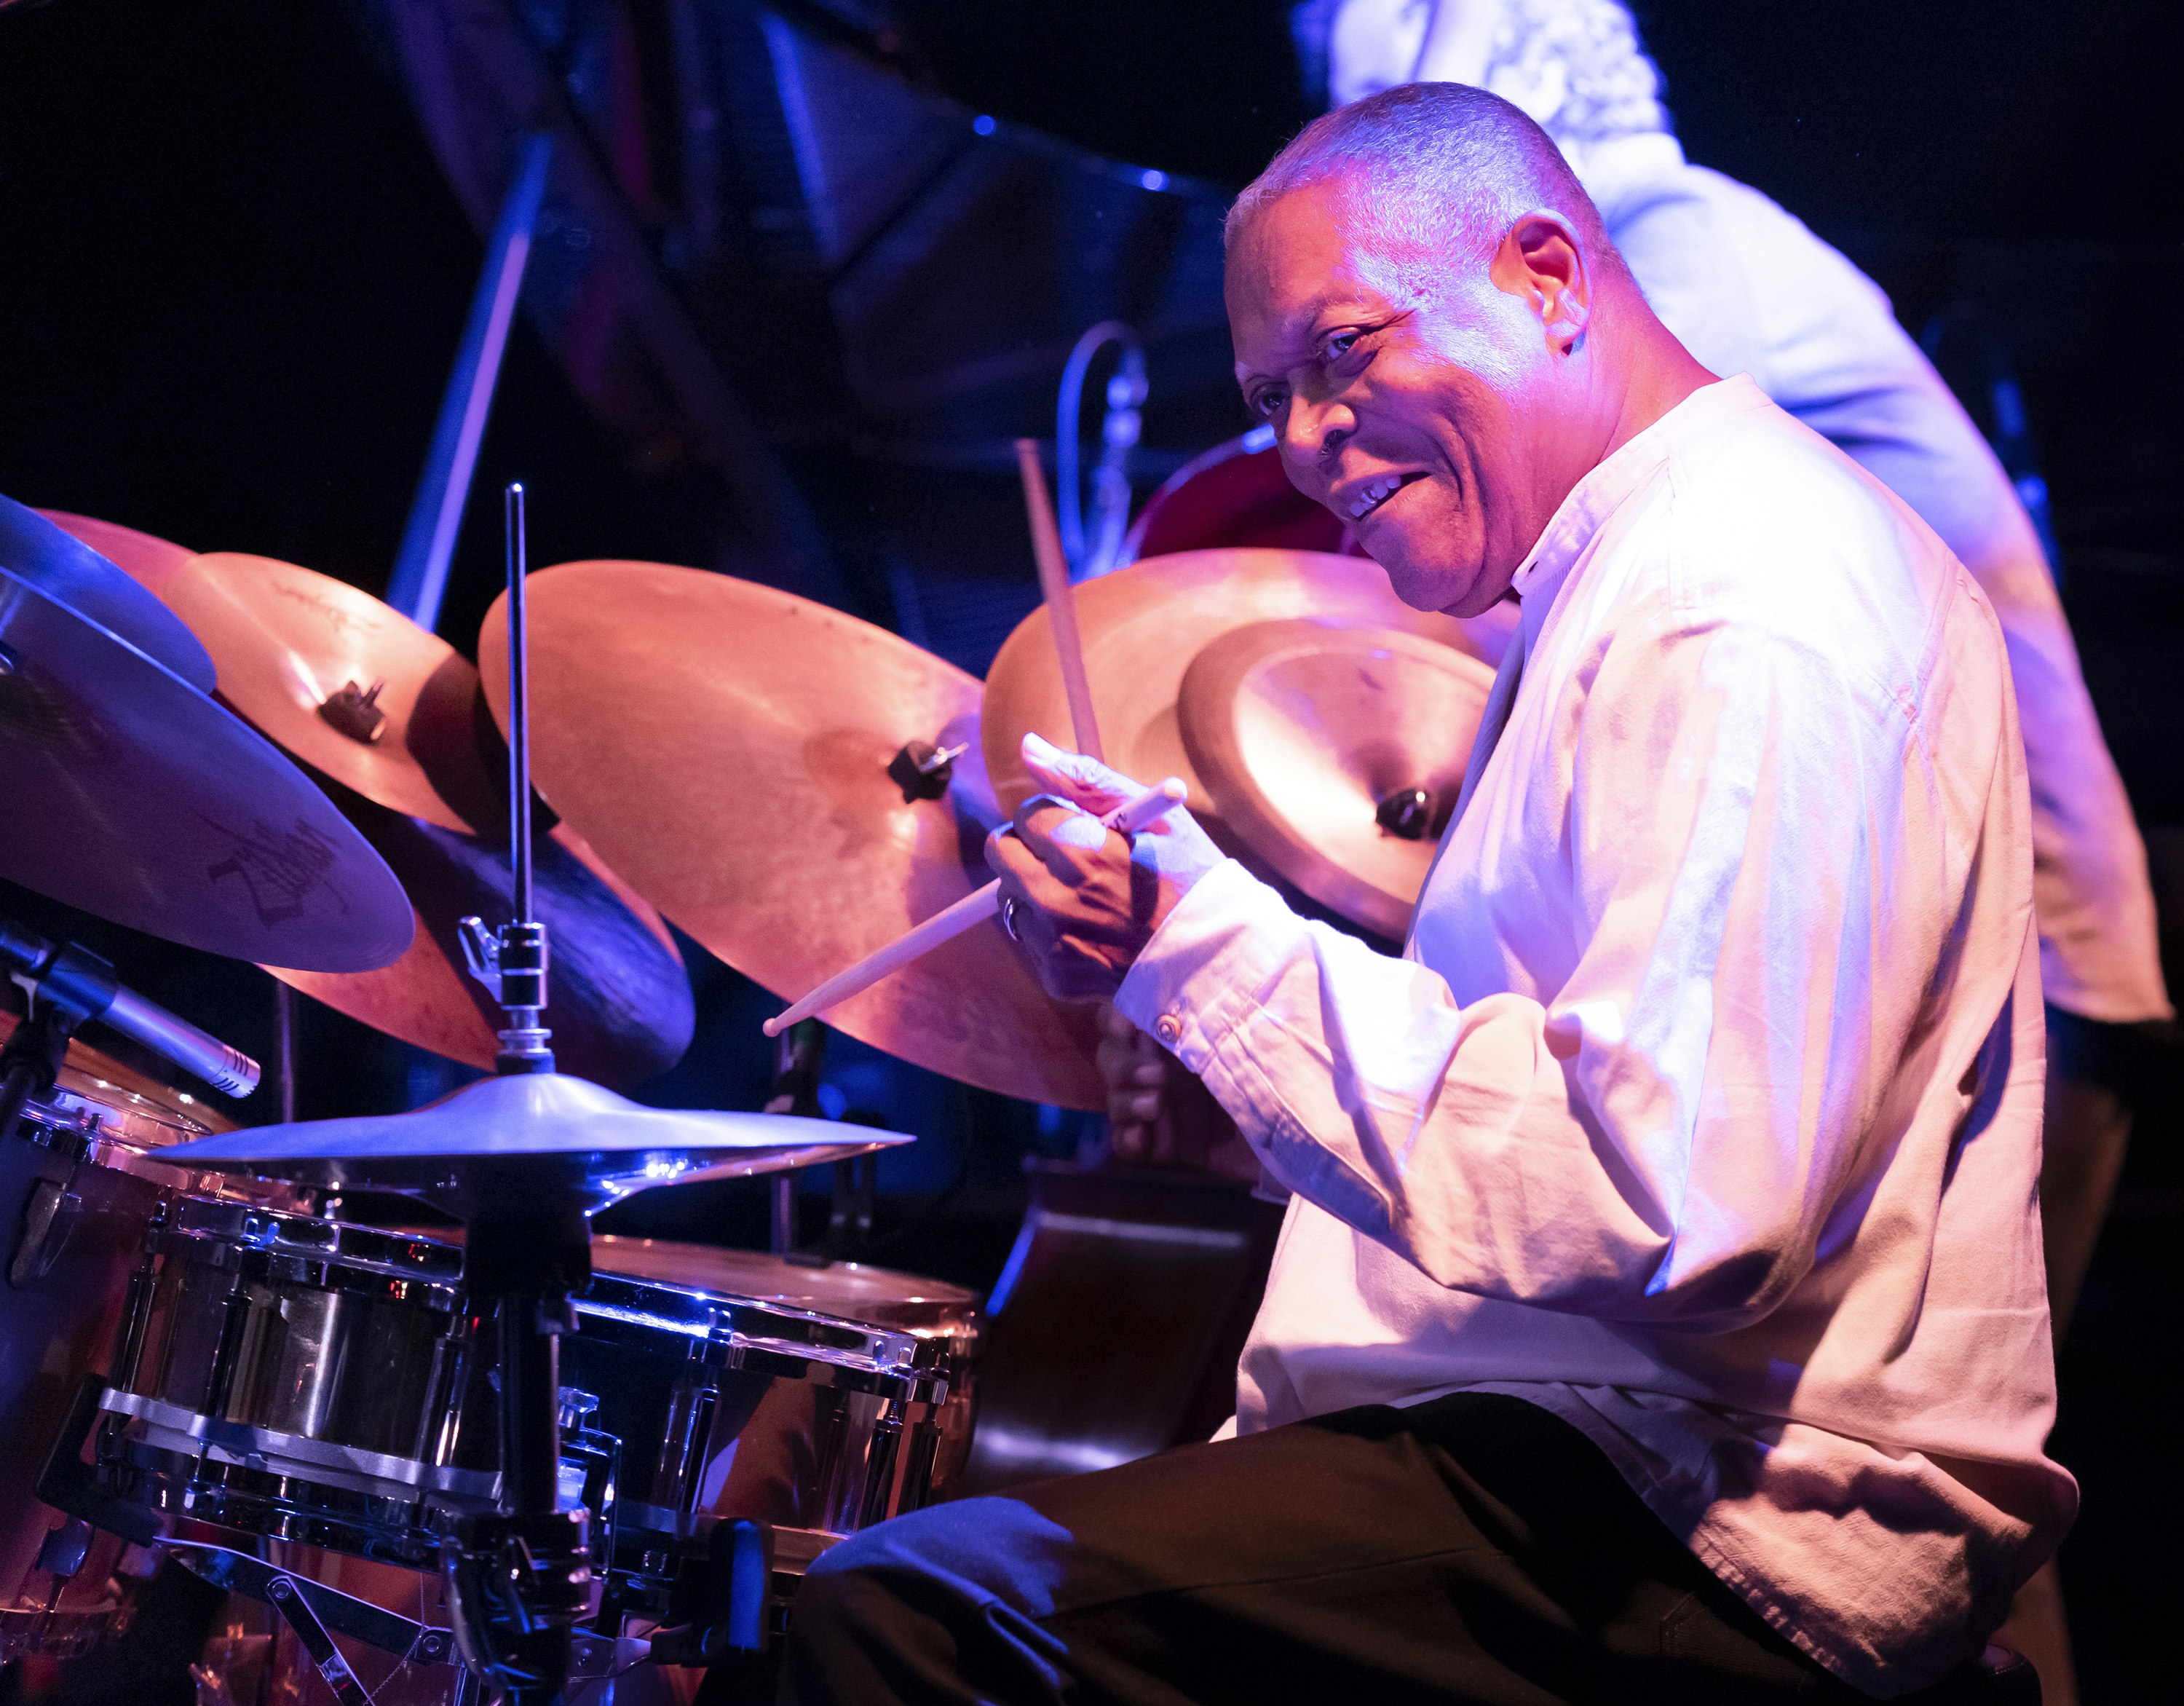 Jazz musician Billy Hart plays the drums during a performance during a Winter JazzFest in New York City.